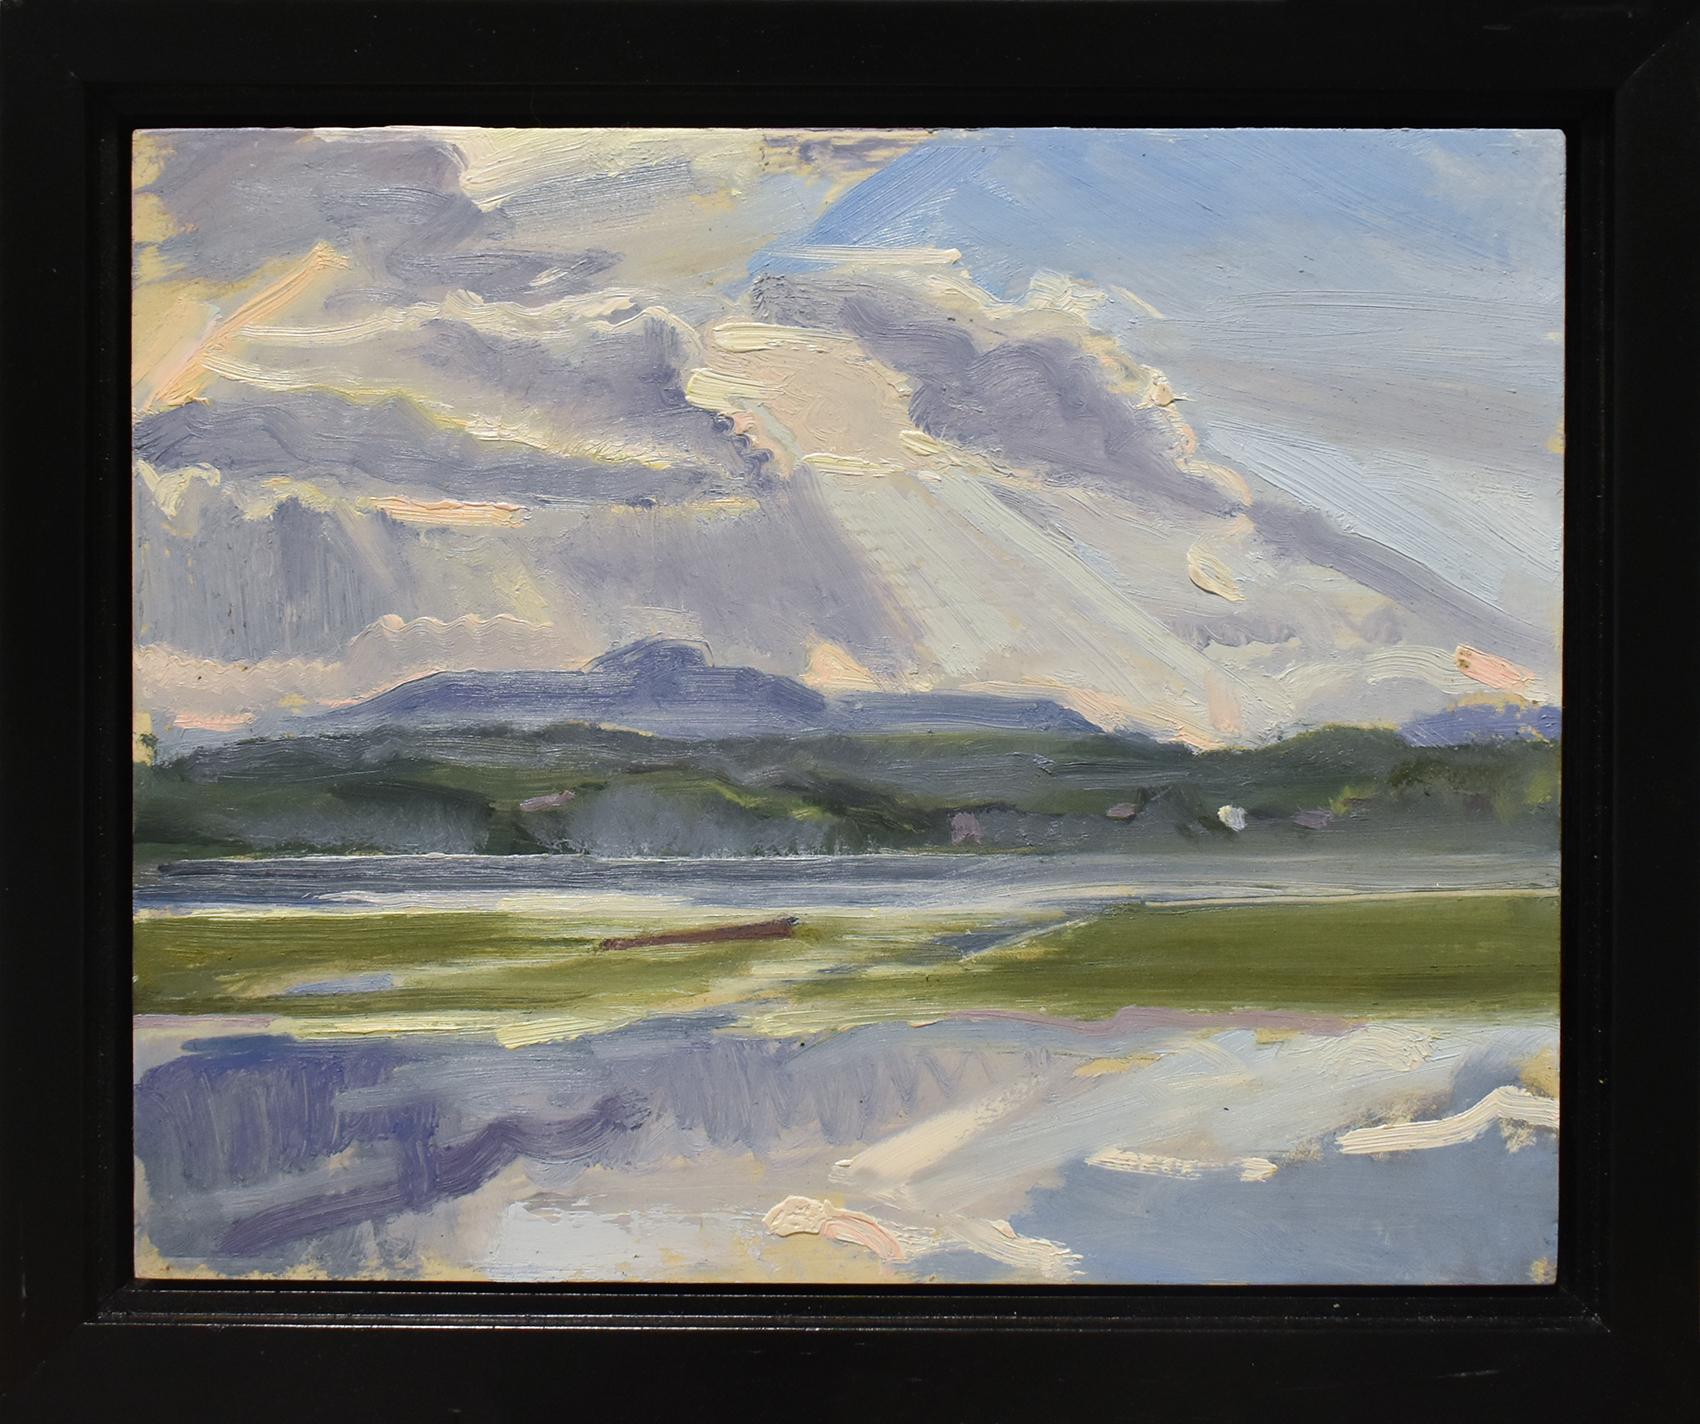 Olana Sky: Painterly Hudson River Valley Landscape Painting of Mountains, Framed 1